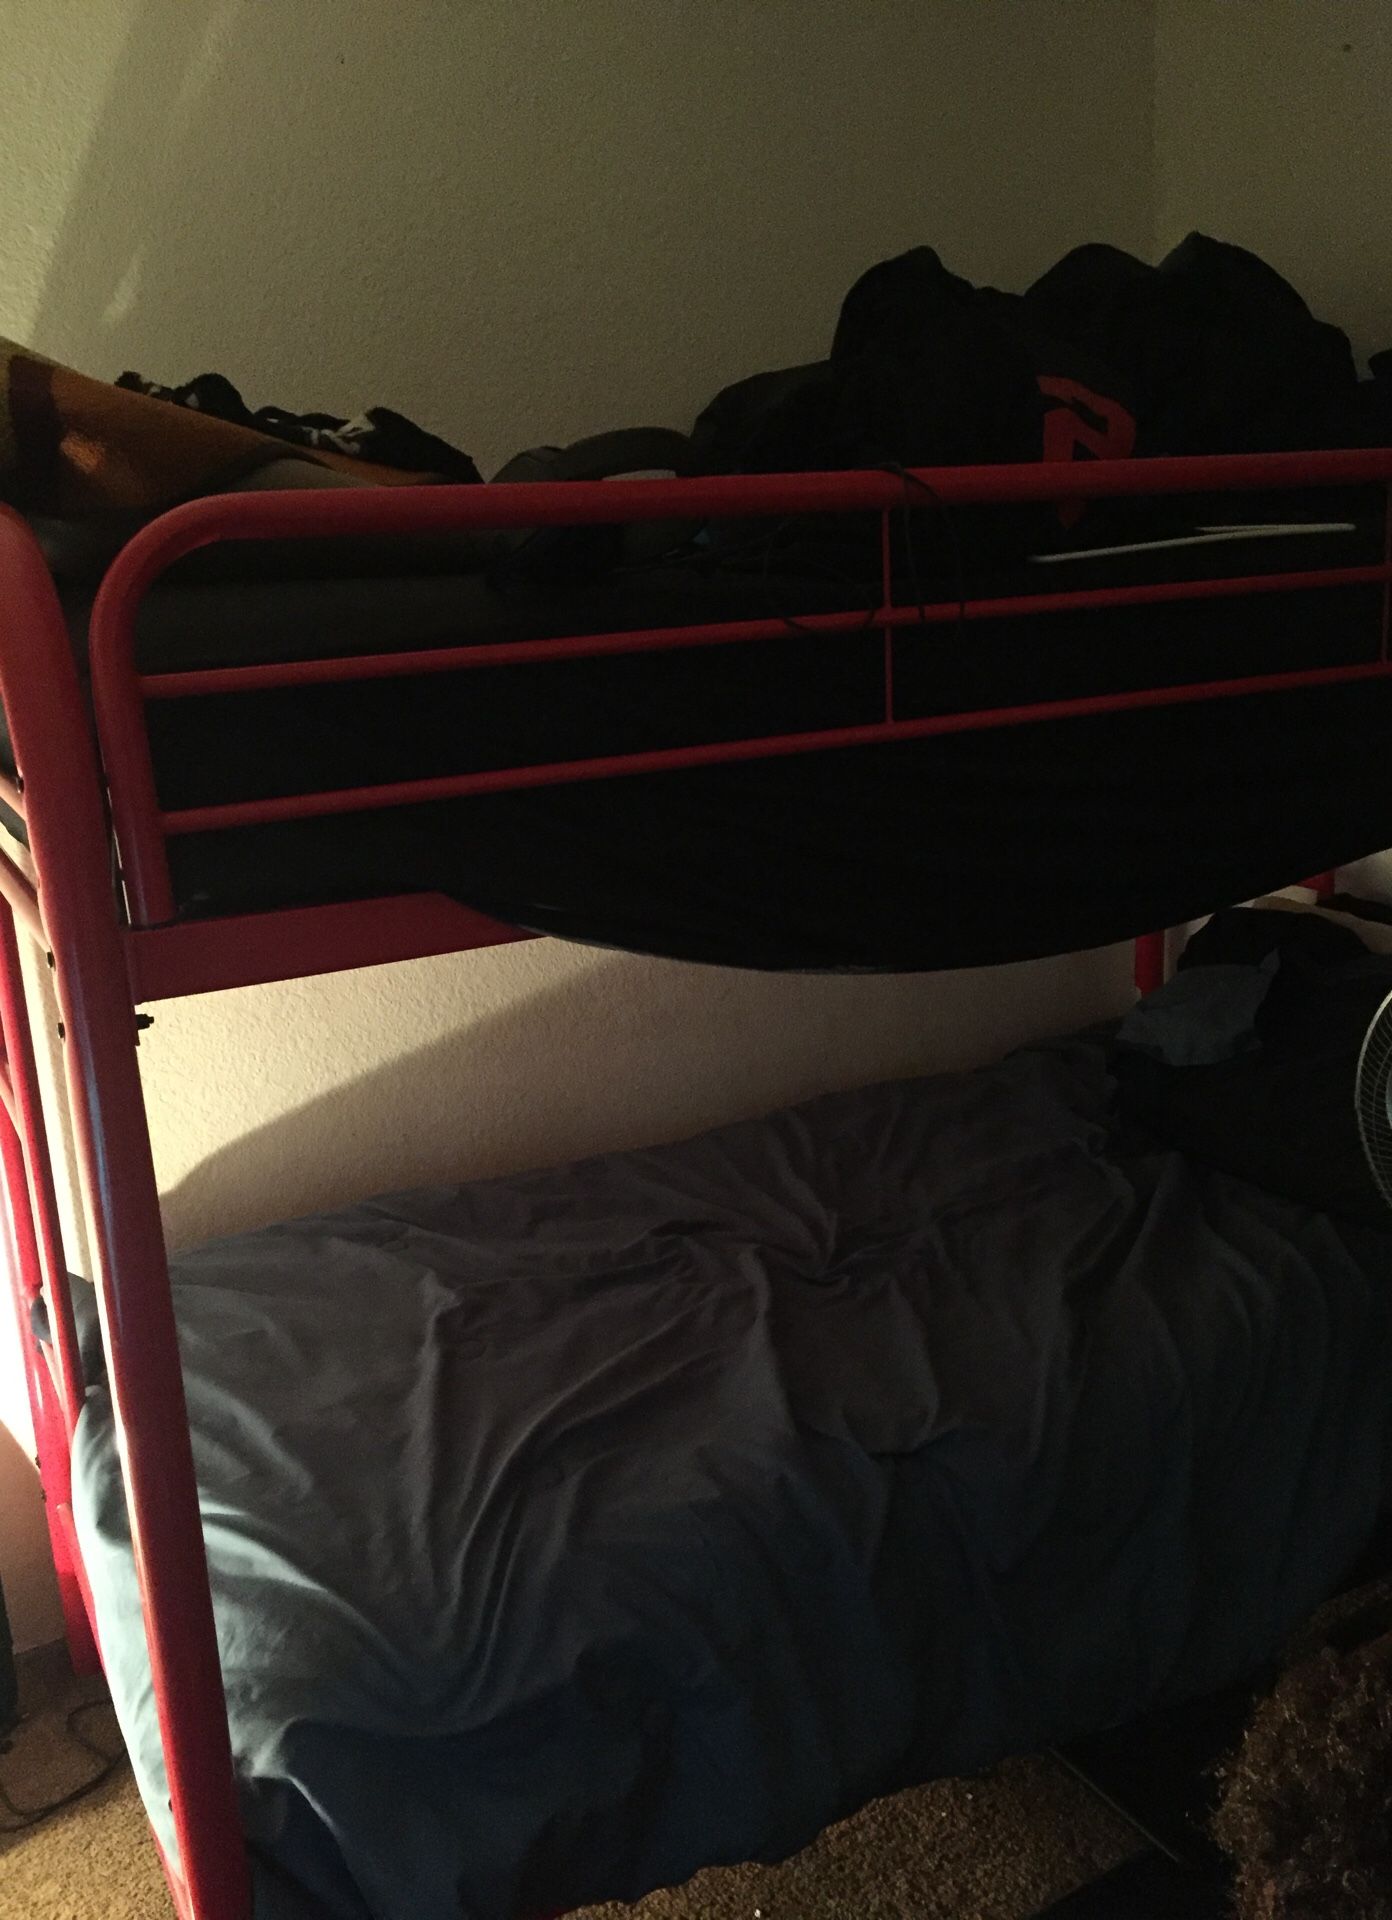 Bunk bed excellent condition free my son is getting a bigger single bed now the top bunk bed nobody sleeps in he’s the only child